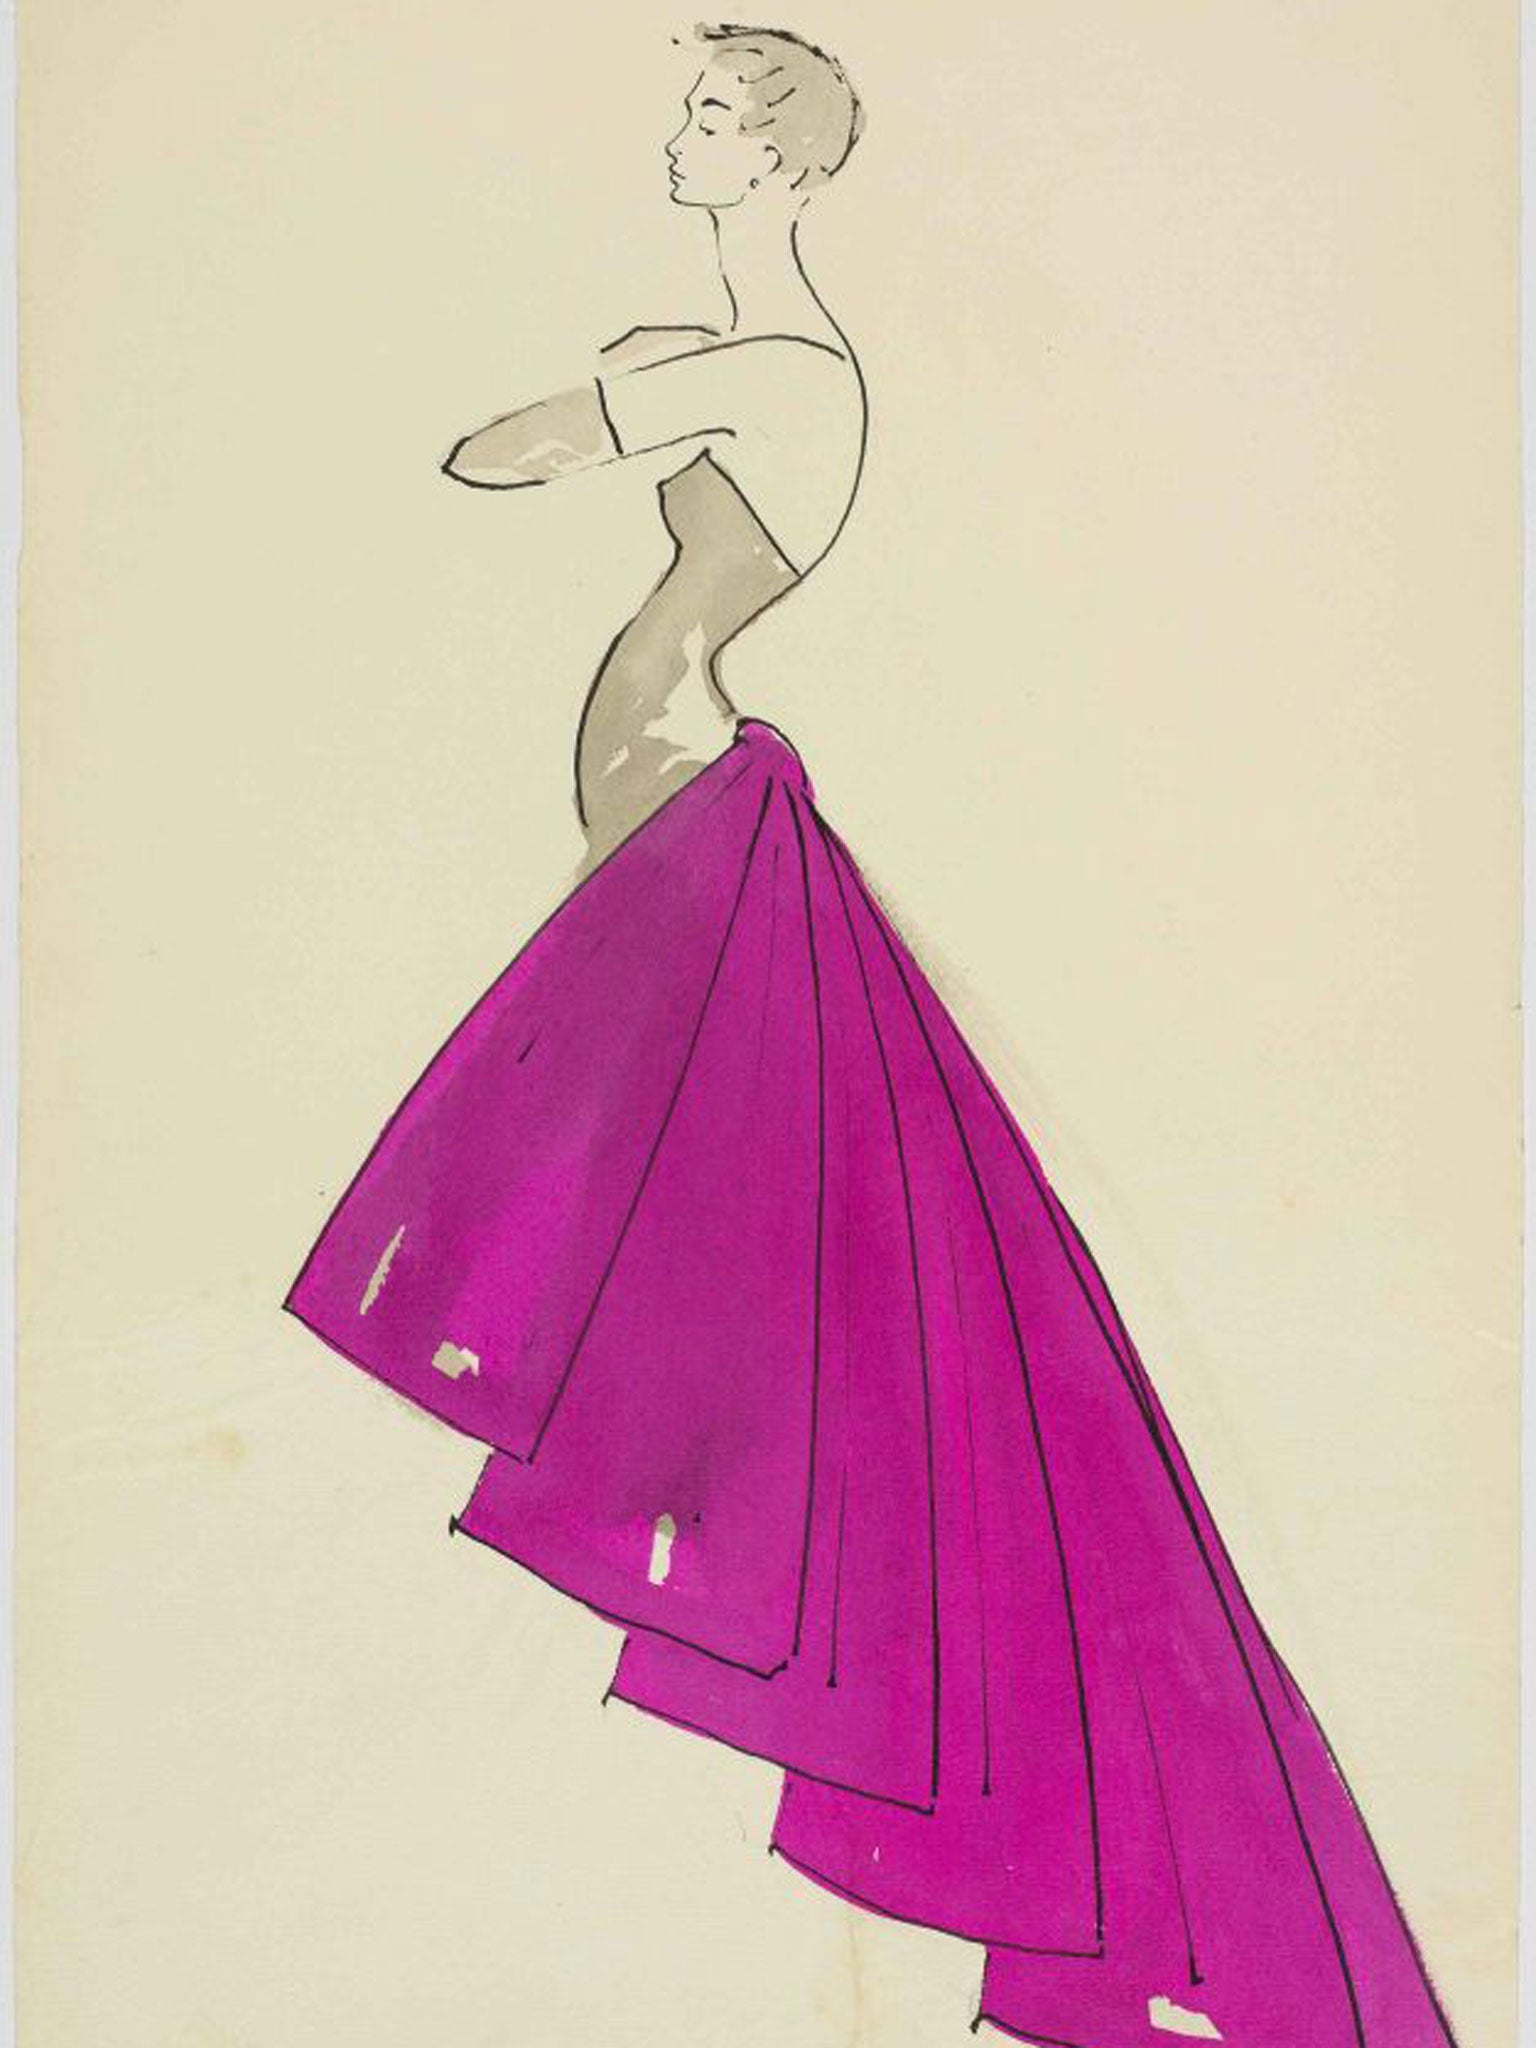 Grand designs: A sketch from the Schiaparelli archives